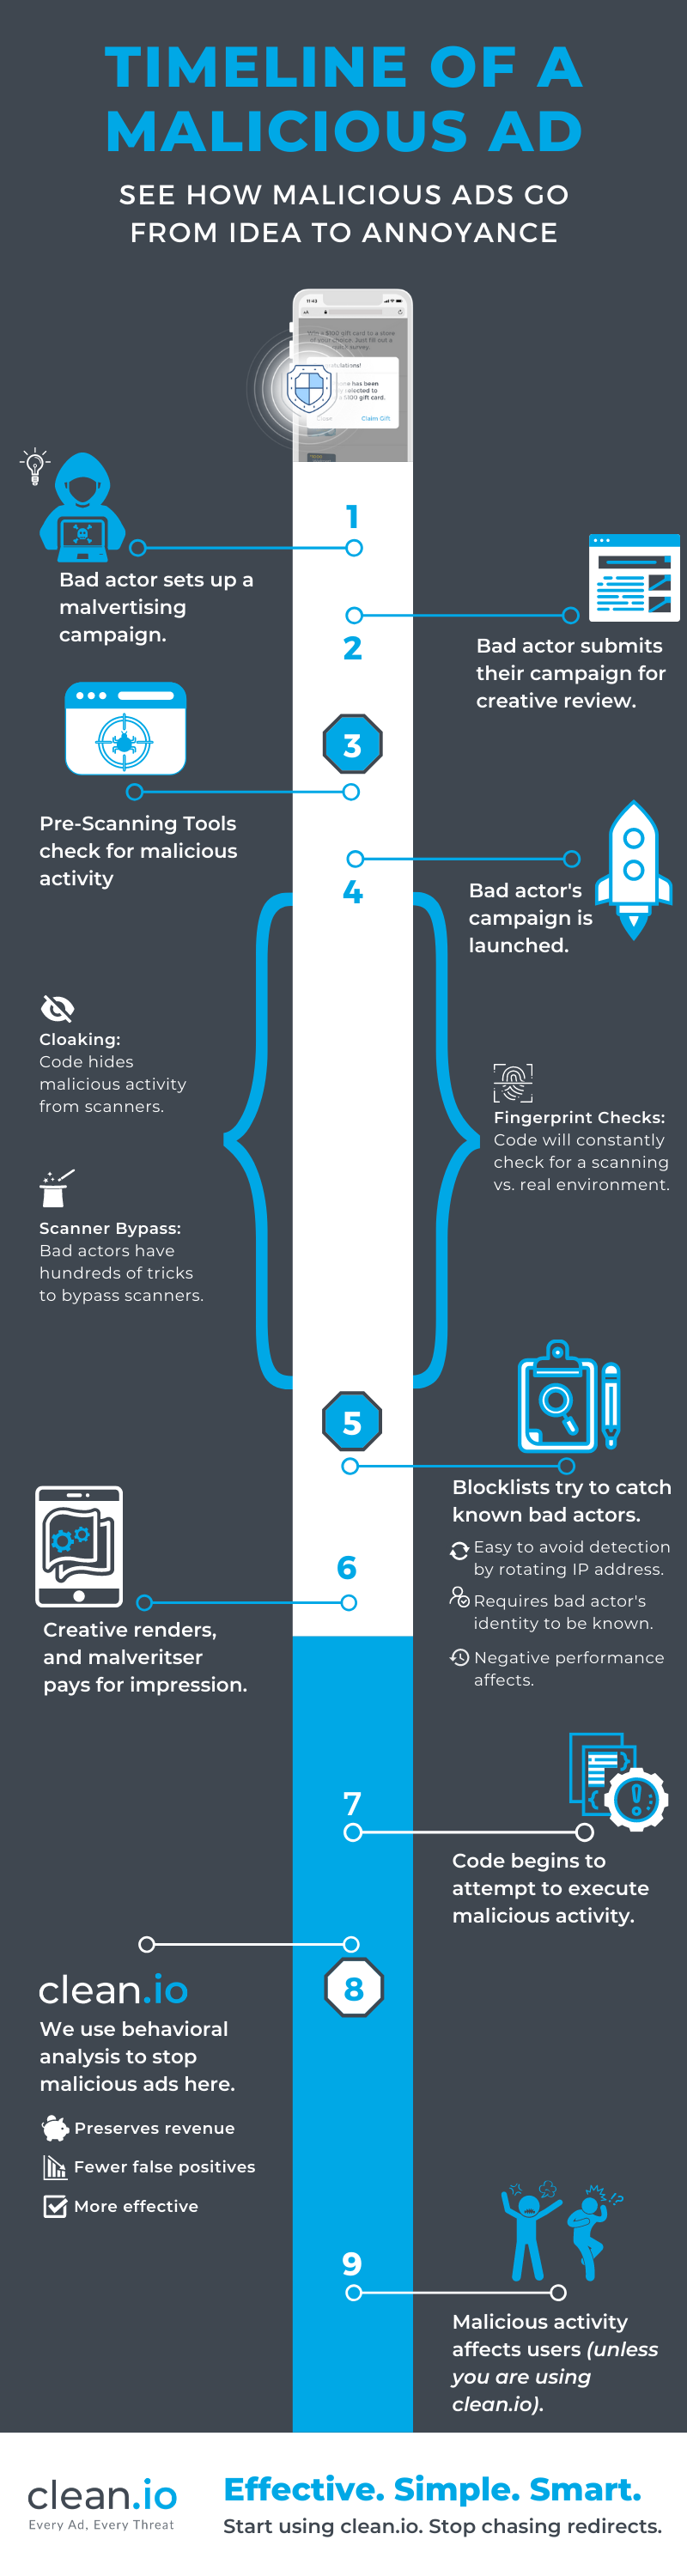 Clean.io-Publisher-Infographic-3